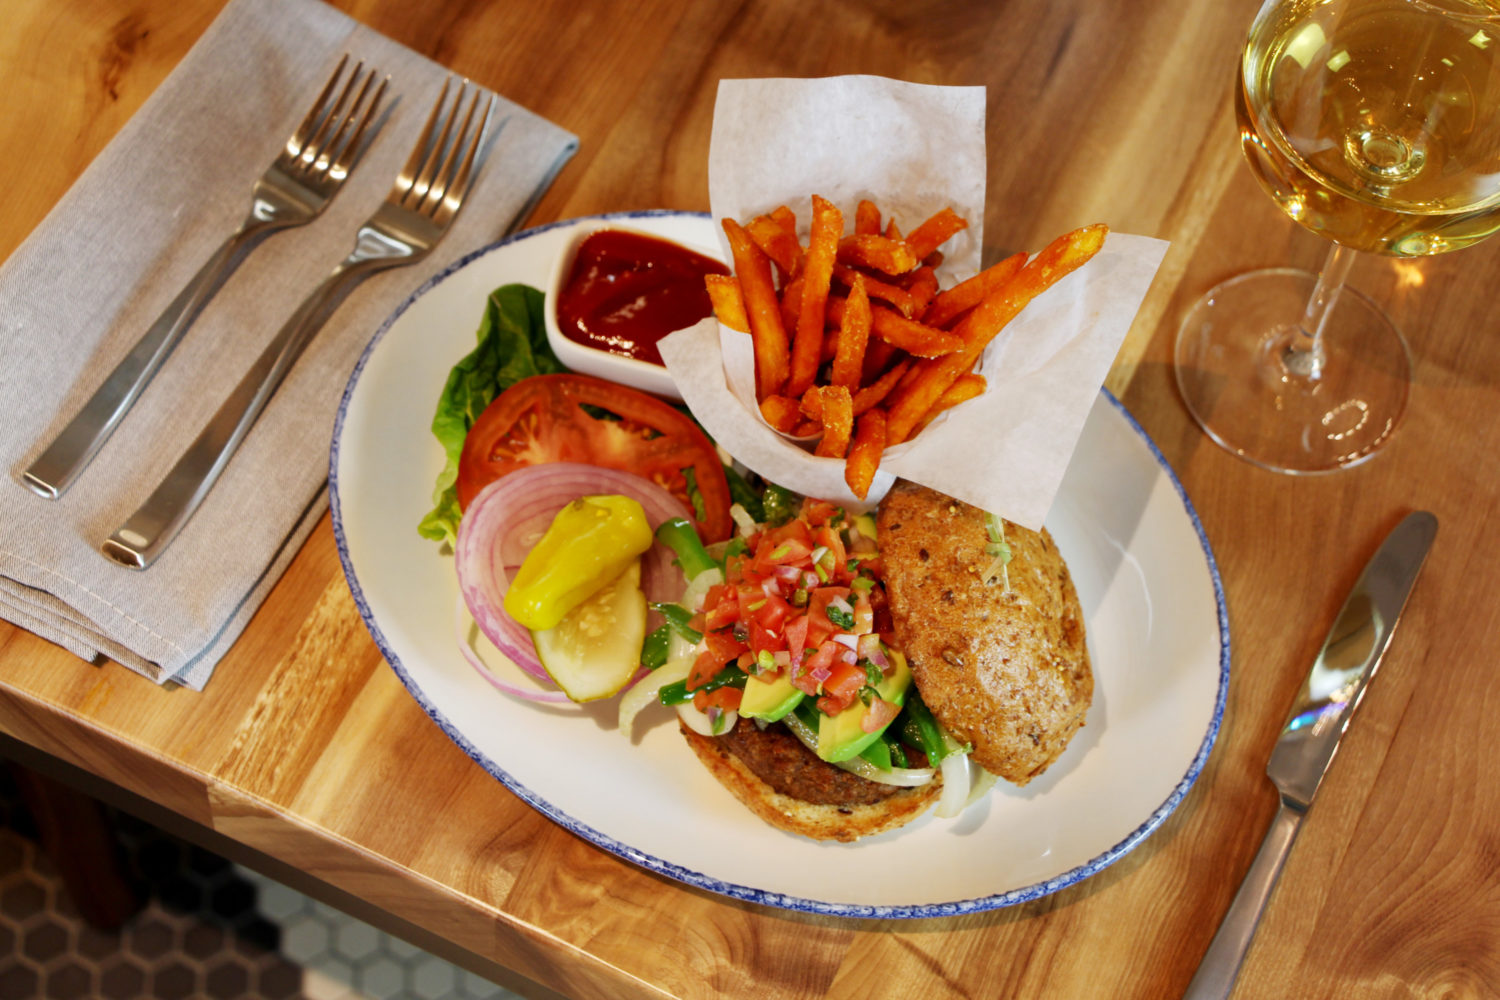 The Commentary menu is filled with vegan fare, like the meatless Beyond Burger. Photo courtesy of the Commentary Social House.